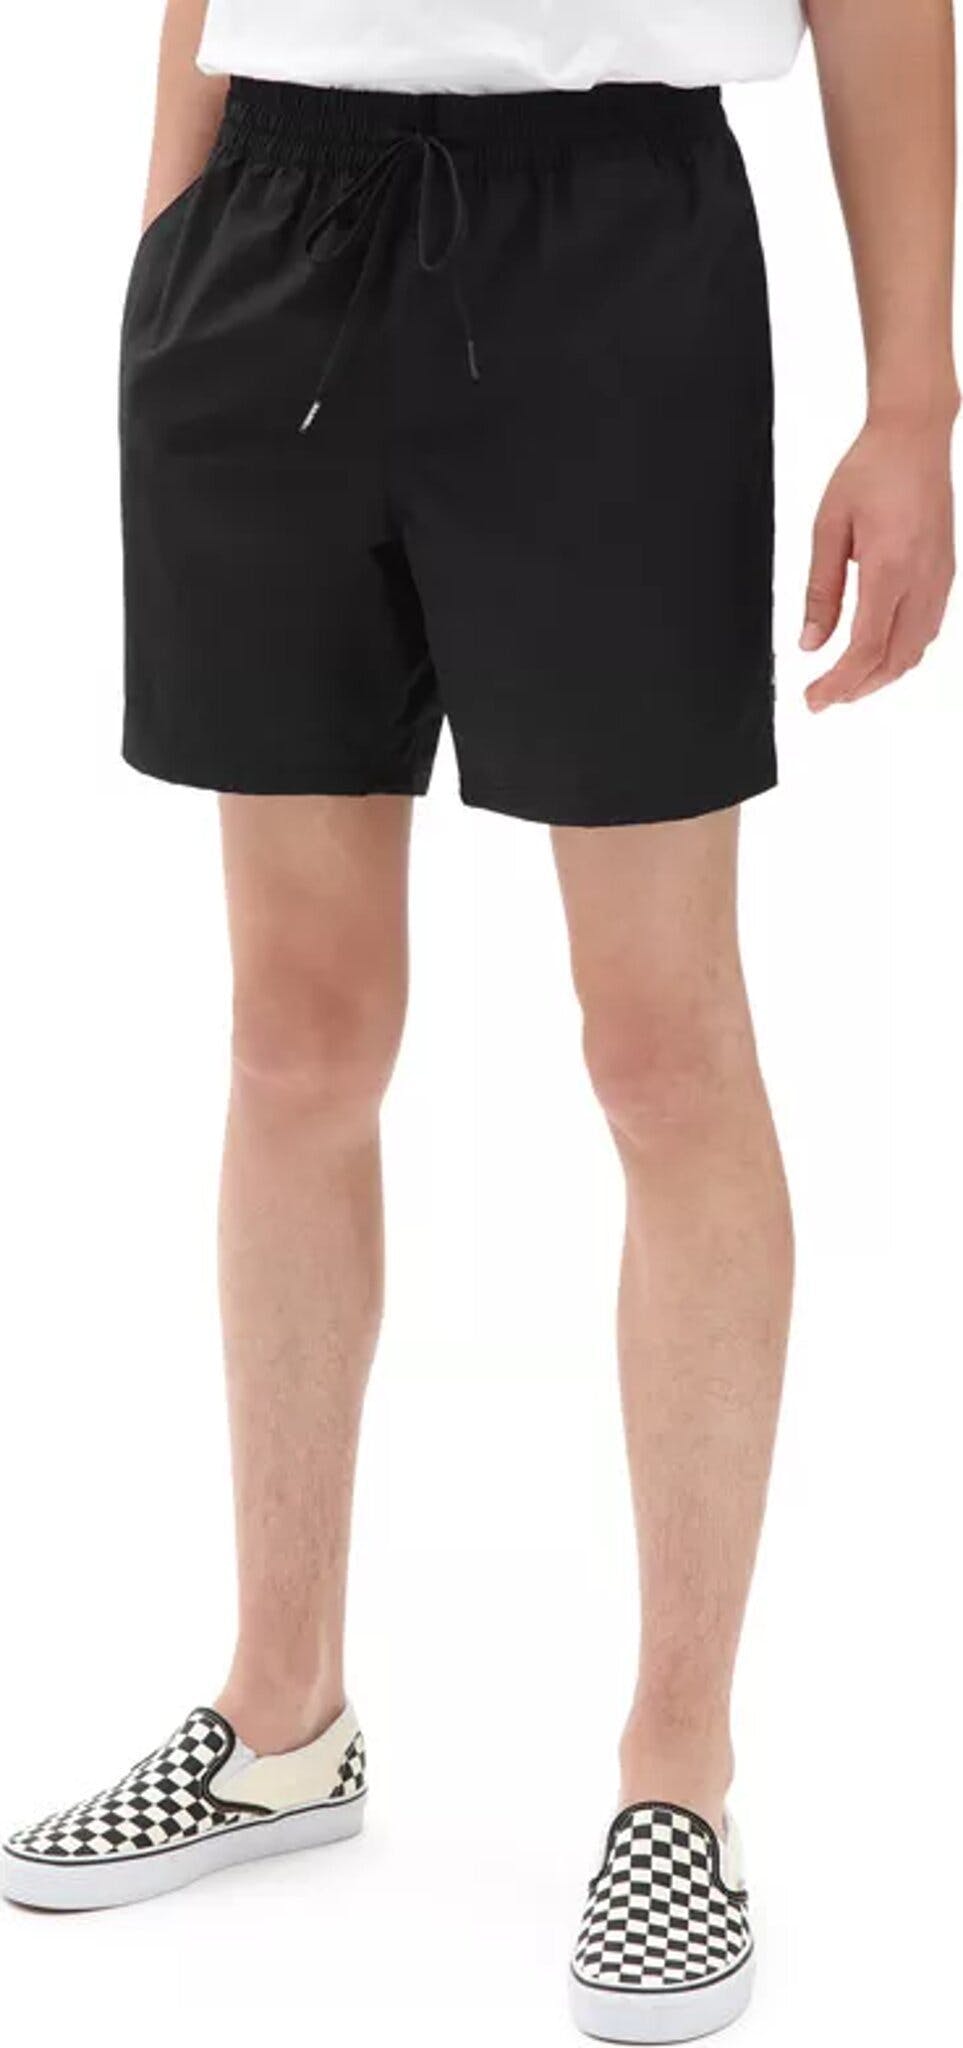 Product image for Primary Volley II Boardshorts - Men's